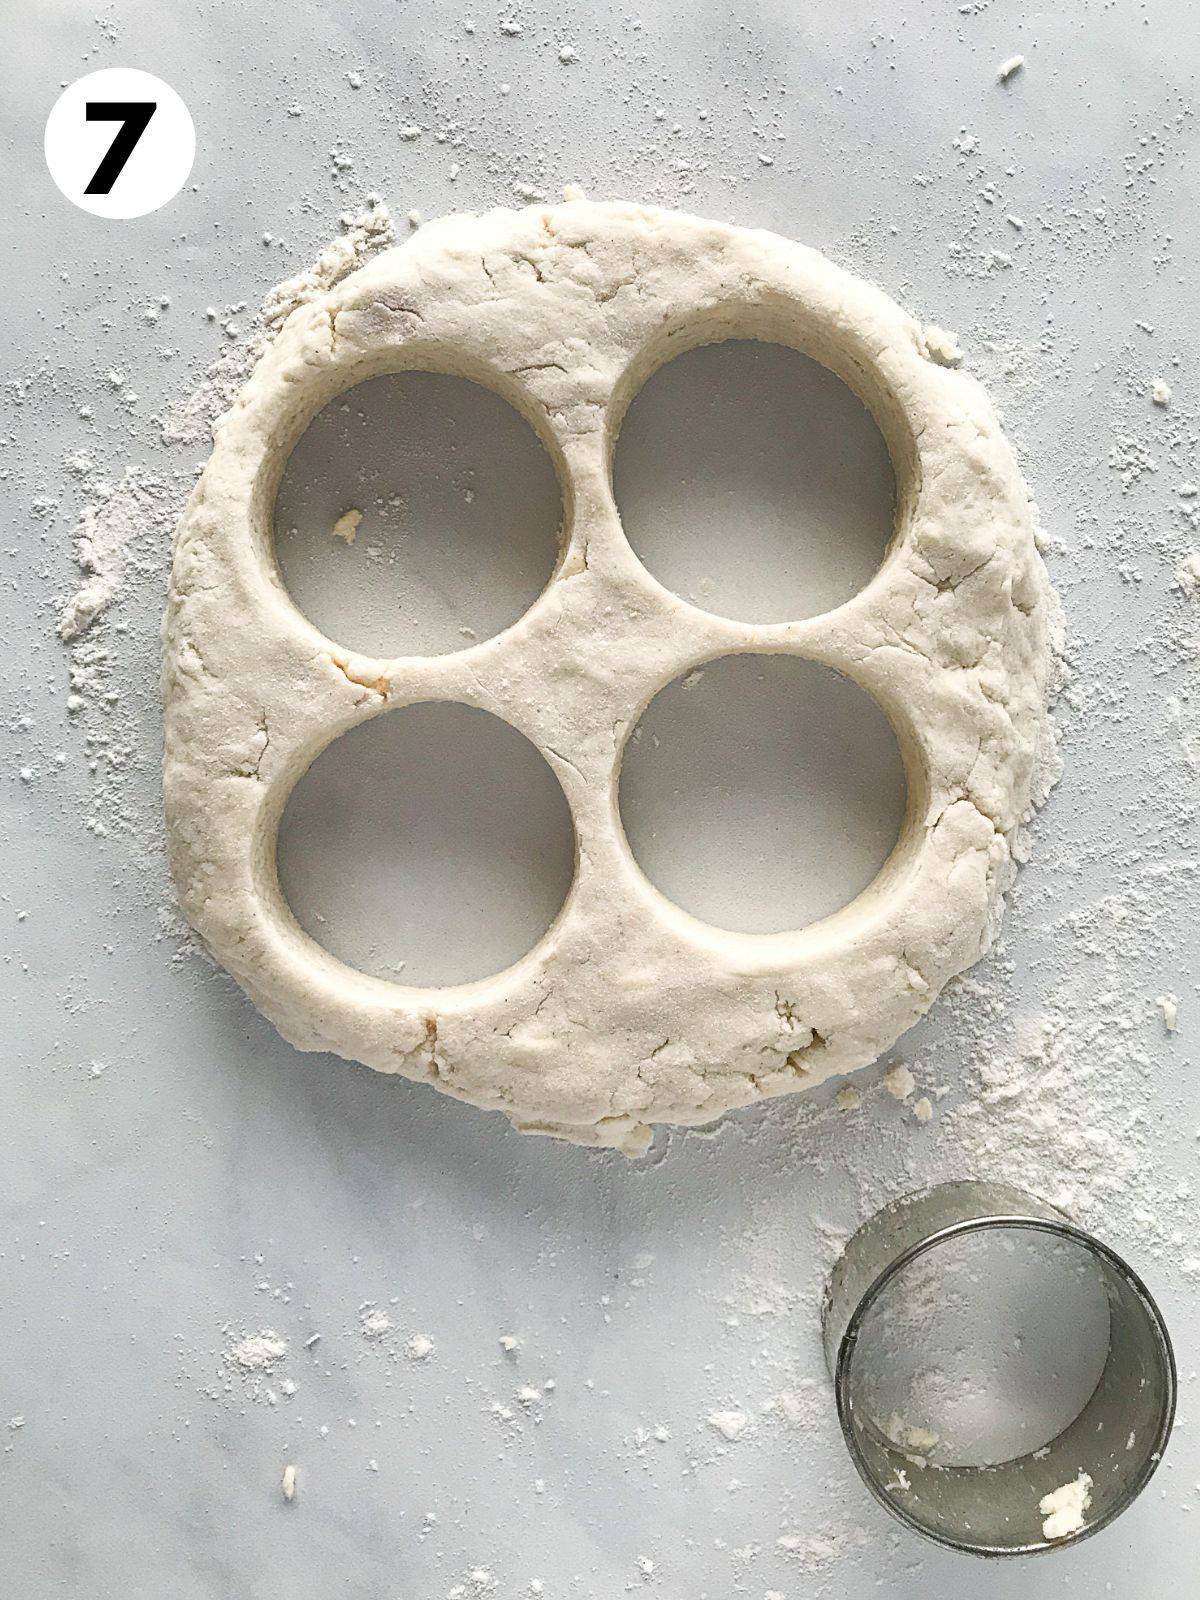 Gluten-free biscuit dough with four rounds cut out. A small 2-inch cutter sits off to the lower right side.